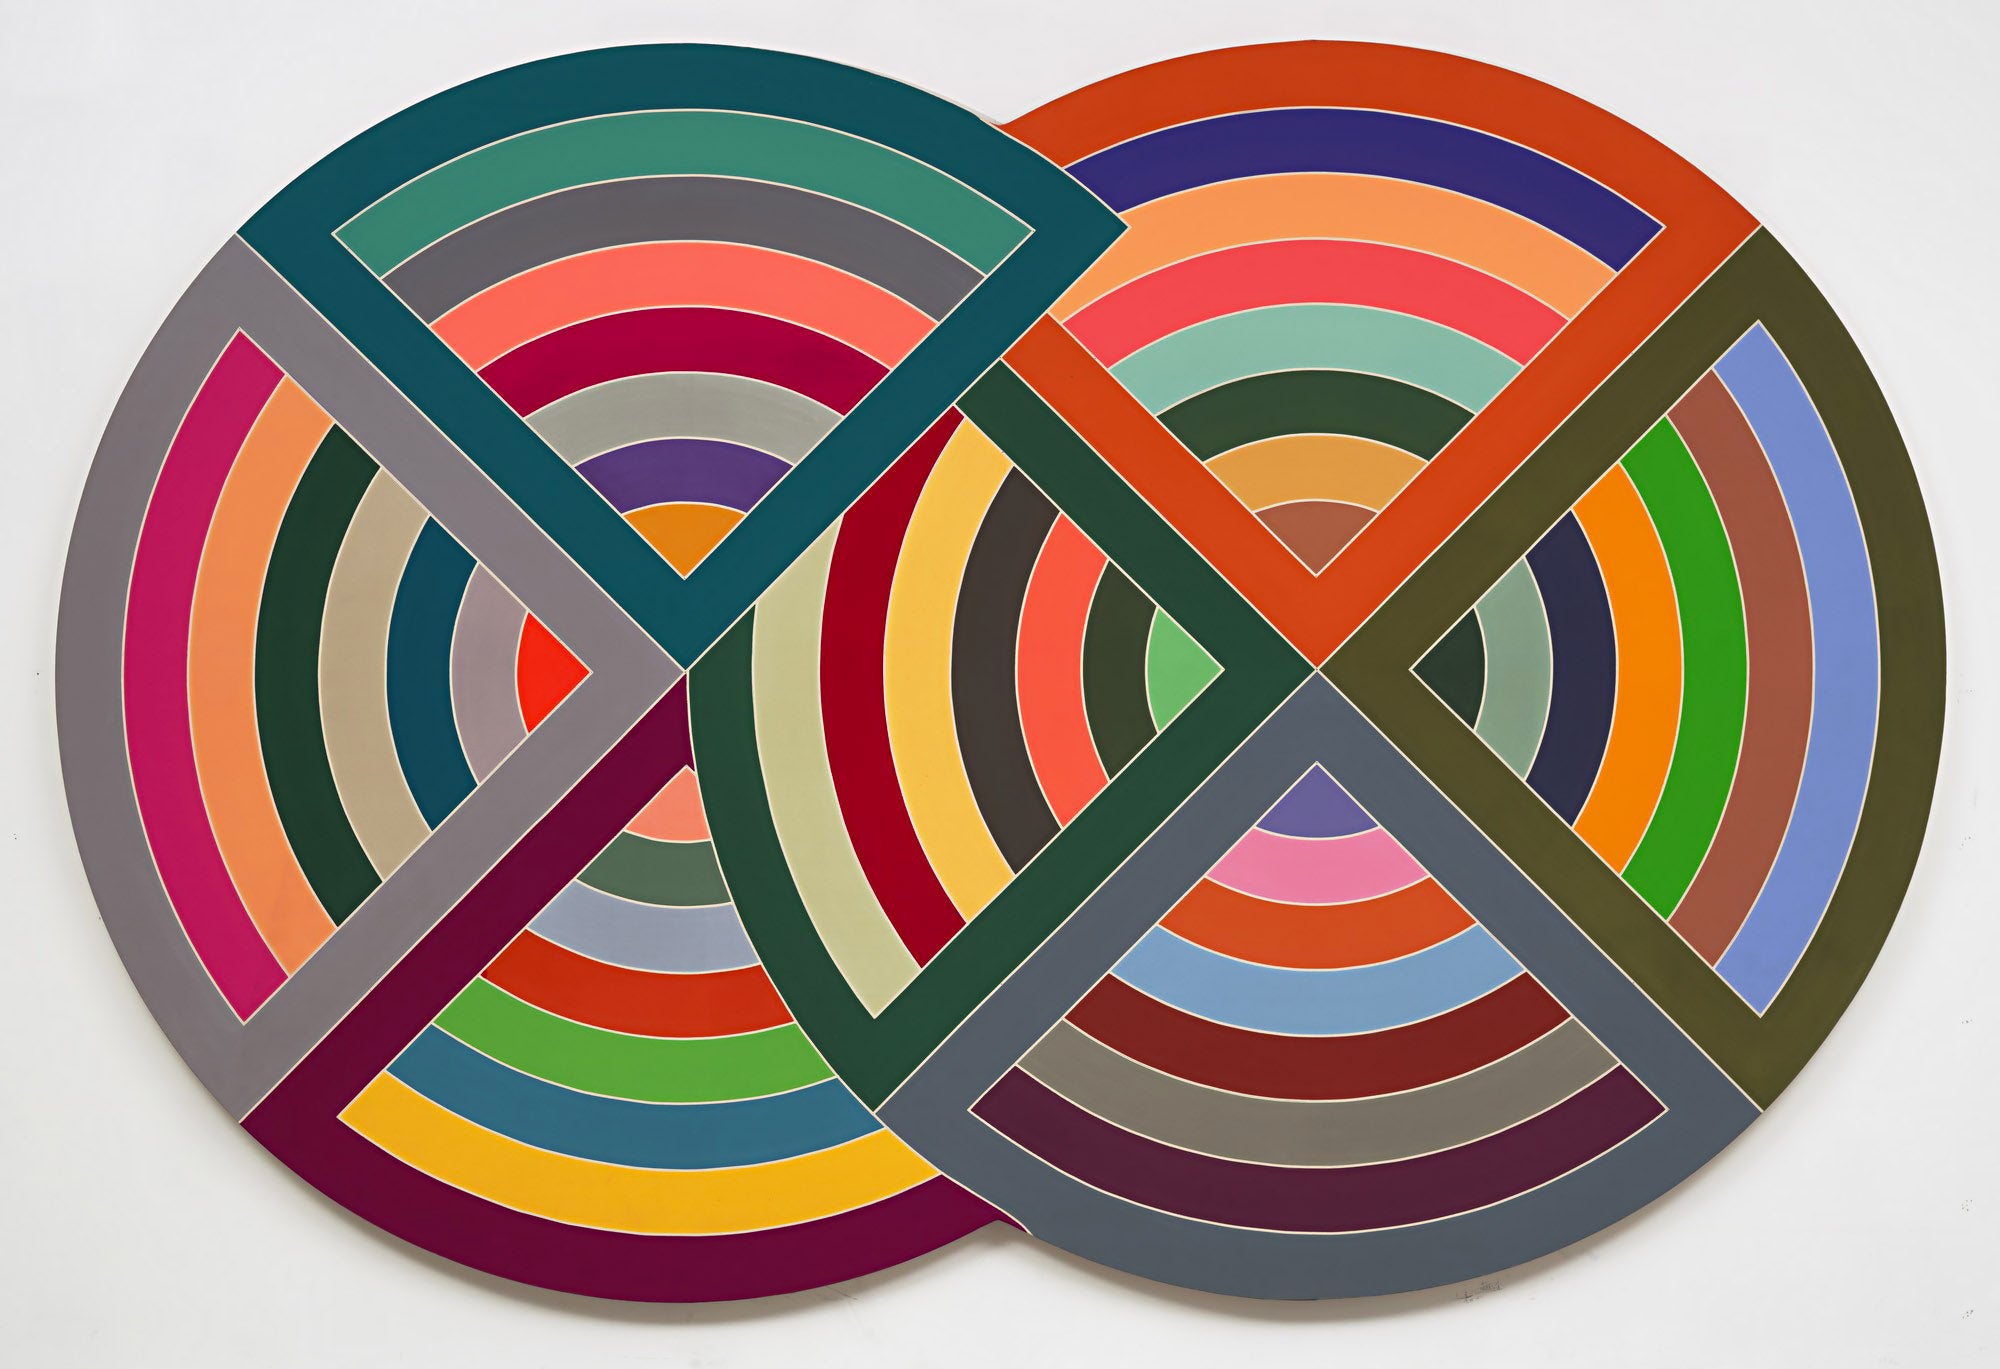 There's something calming about this Frank Stella geometric puzzle for adults that has me-time written all over it. With its round shape and stress-relieving pattern, this is one we can get on board with.